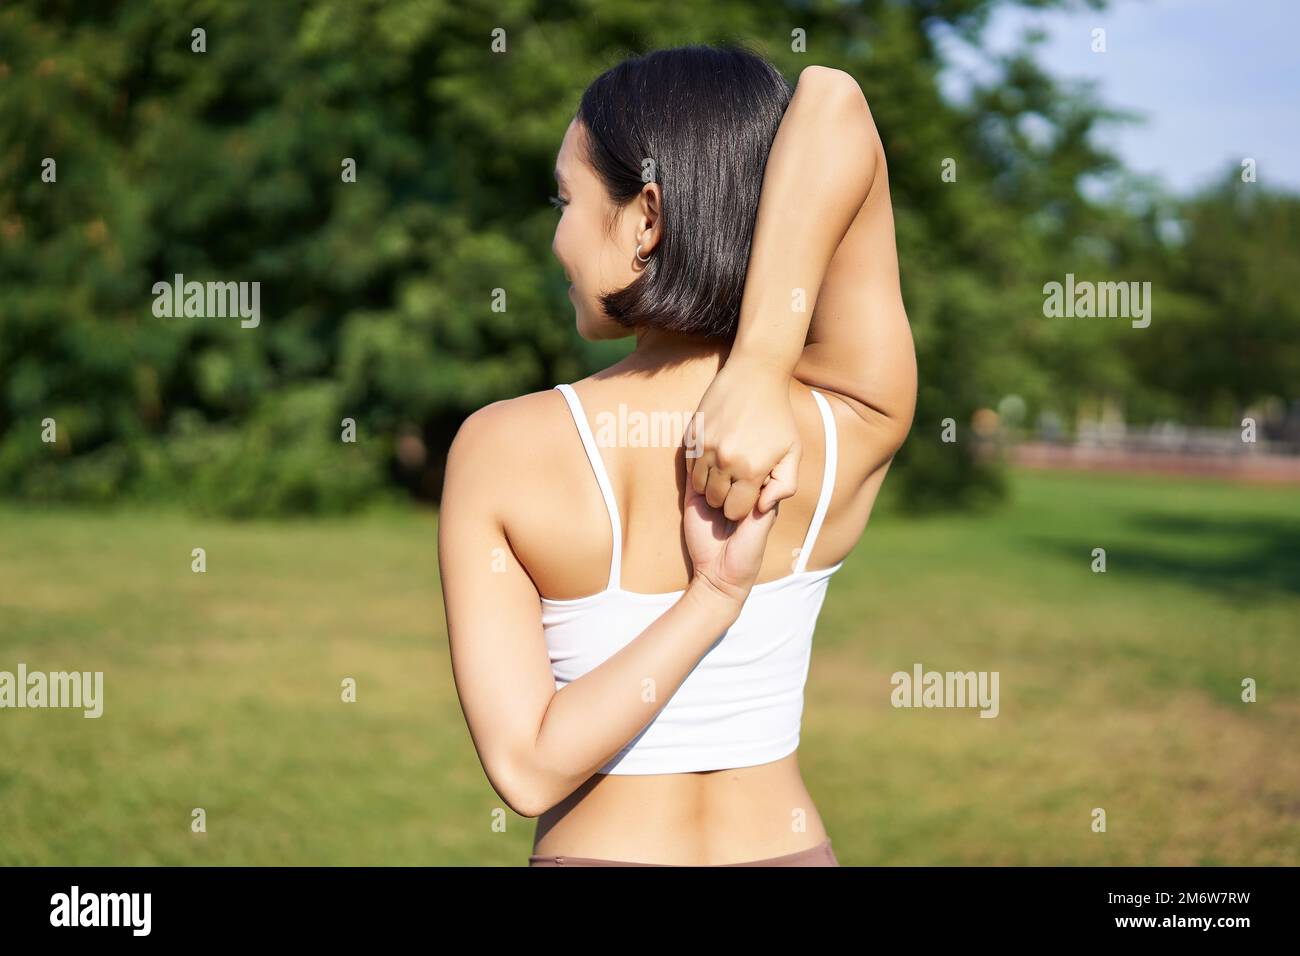 Rear view of young sporty woman stretching her arms behind back, warm-up, prepare for workout jogging, sport event in park Stock Photo